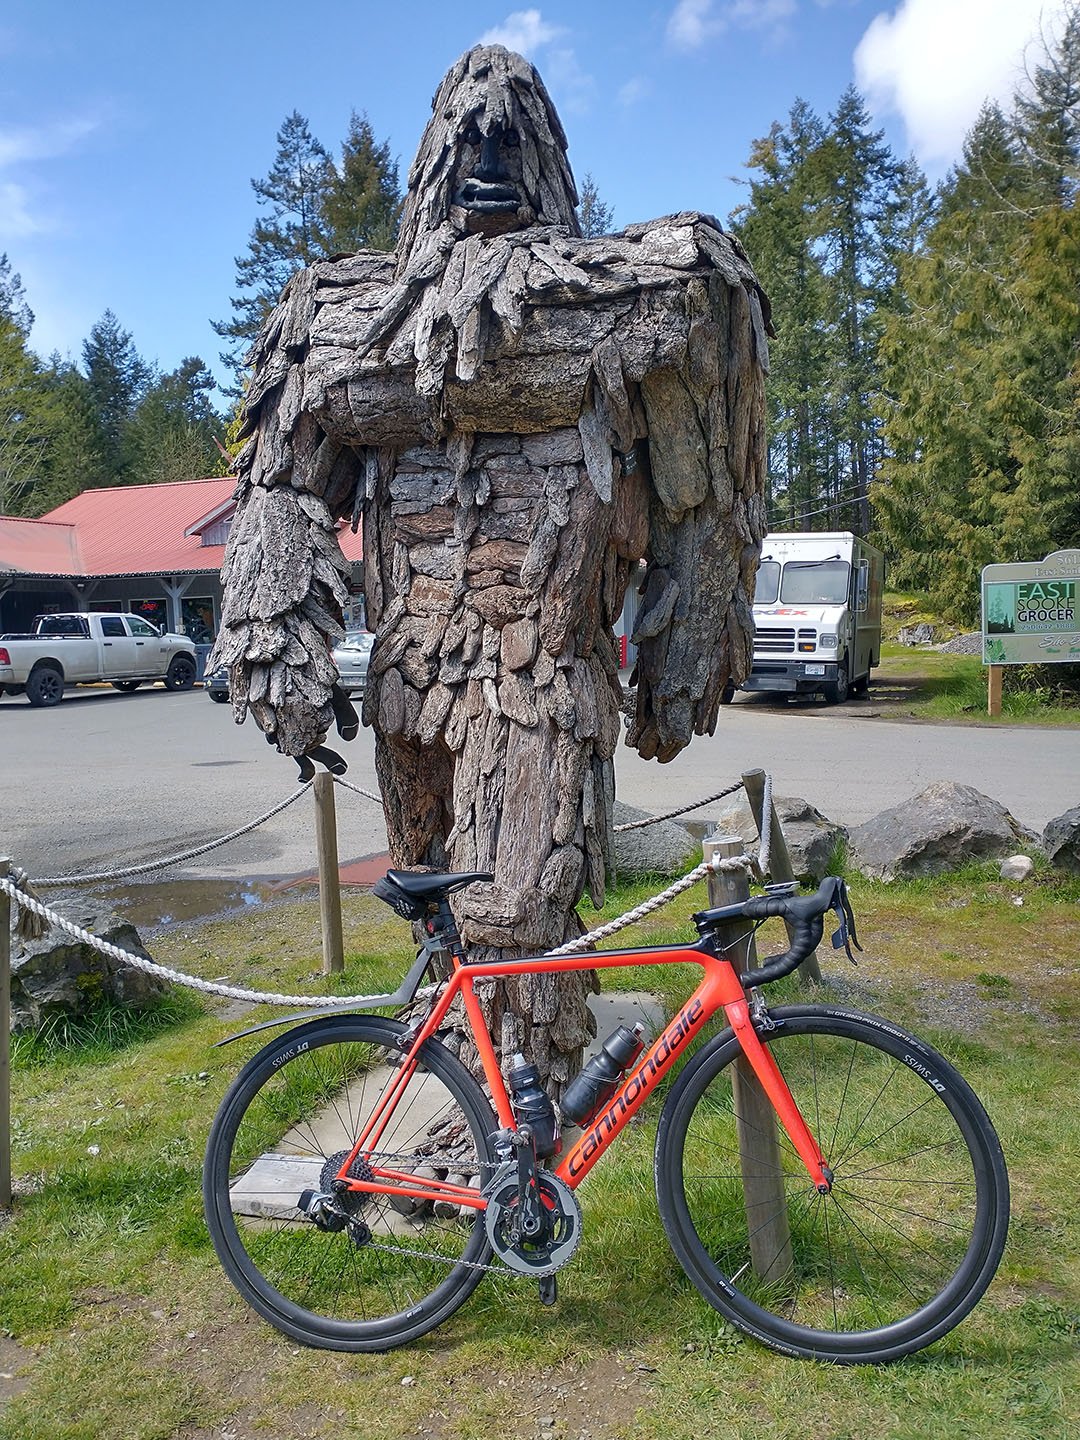  At the crossroads between East Sooke and going back north towards Victoria, you’ll find the SOOKESQUATCH along with a convenience store and possibly food trucks. 